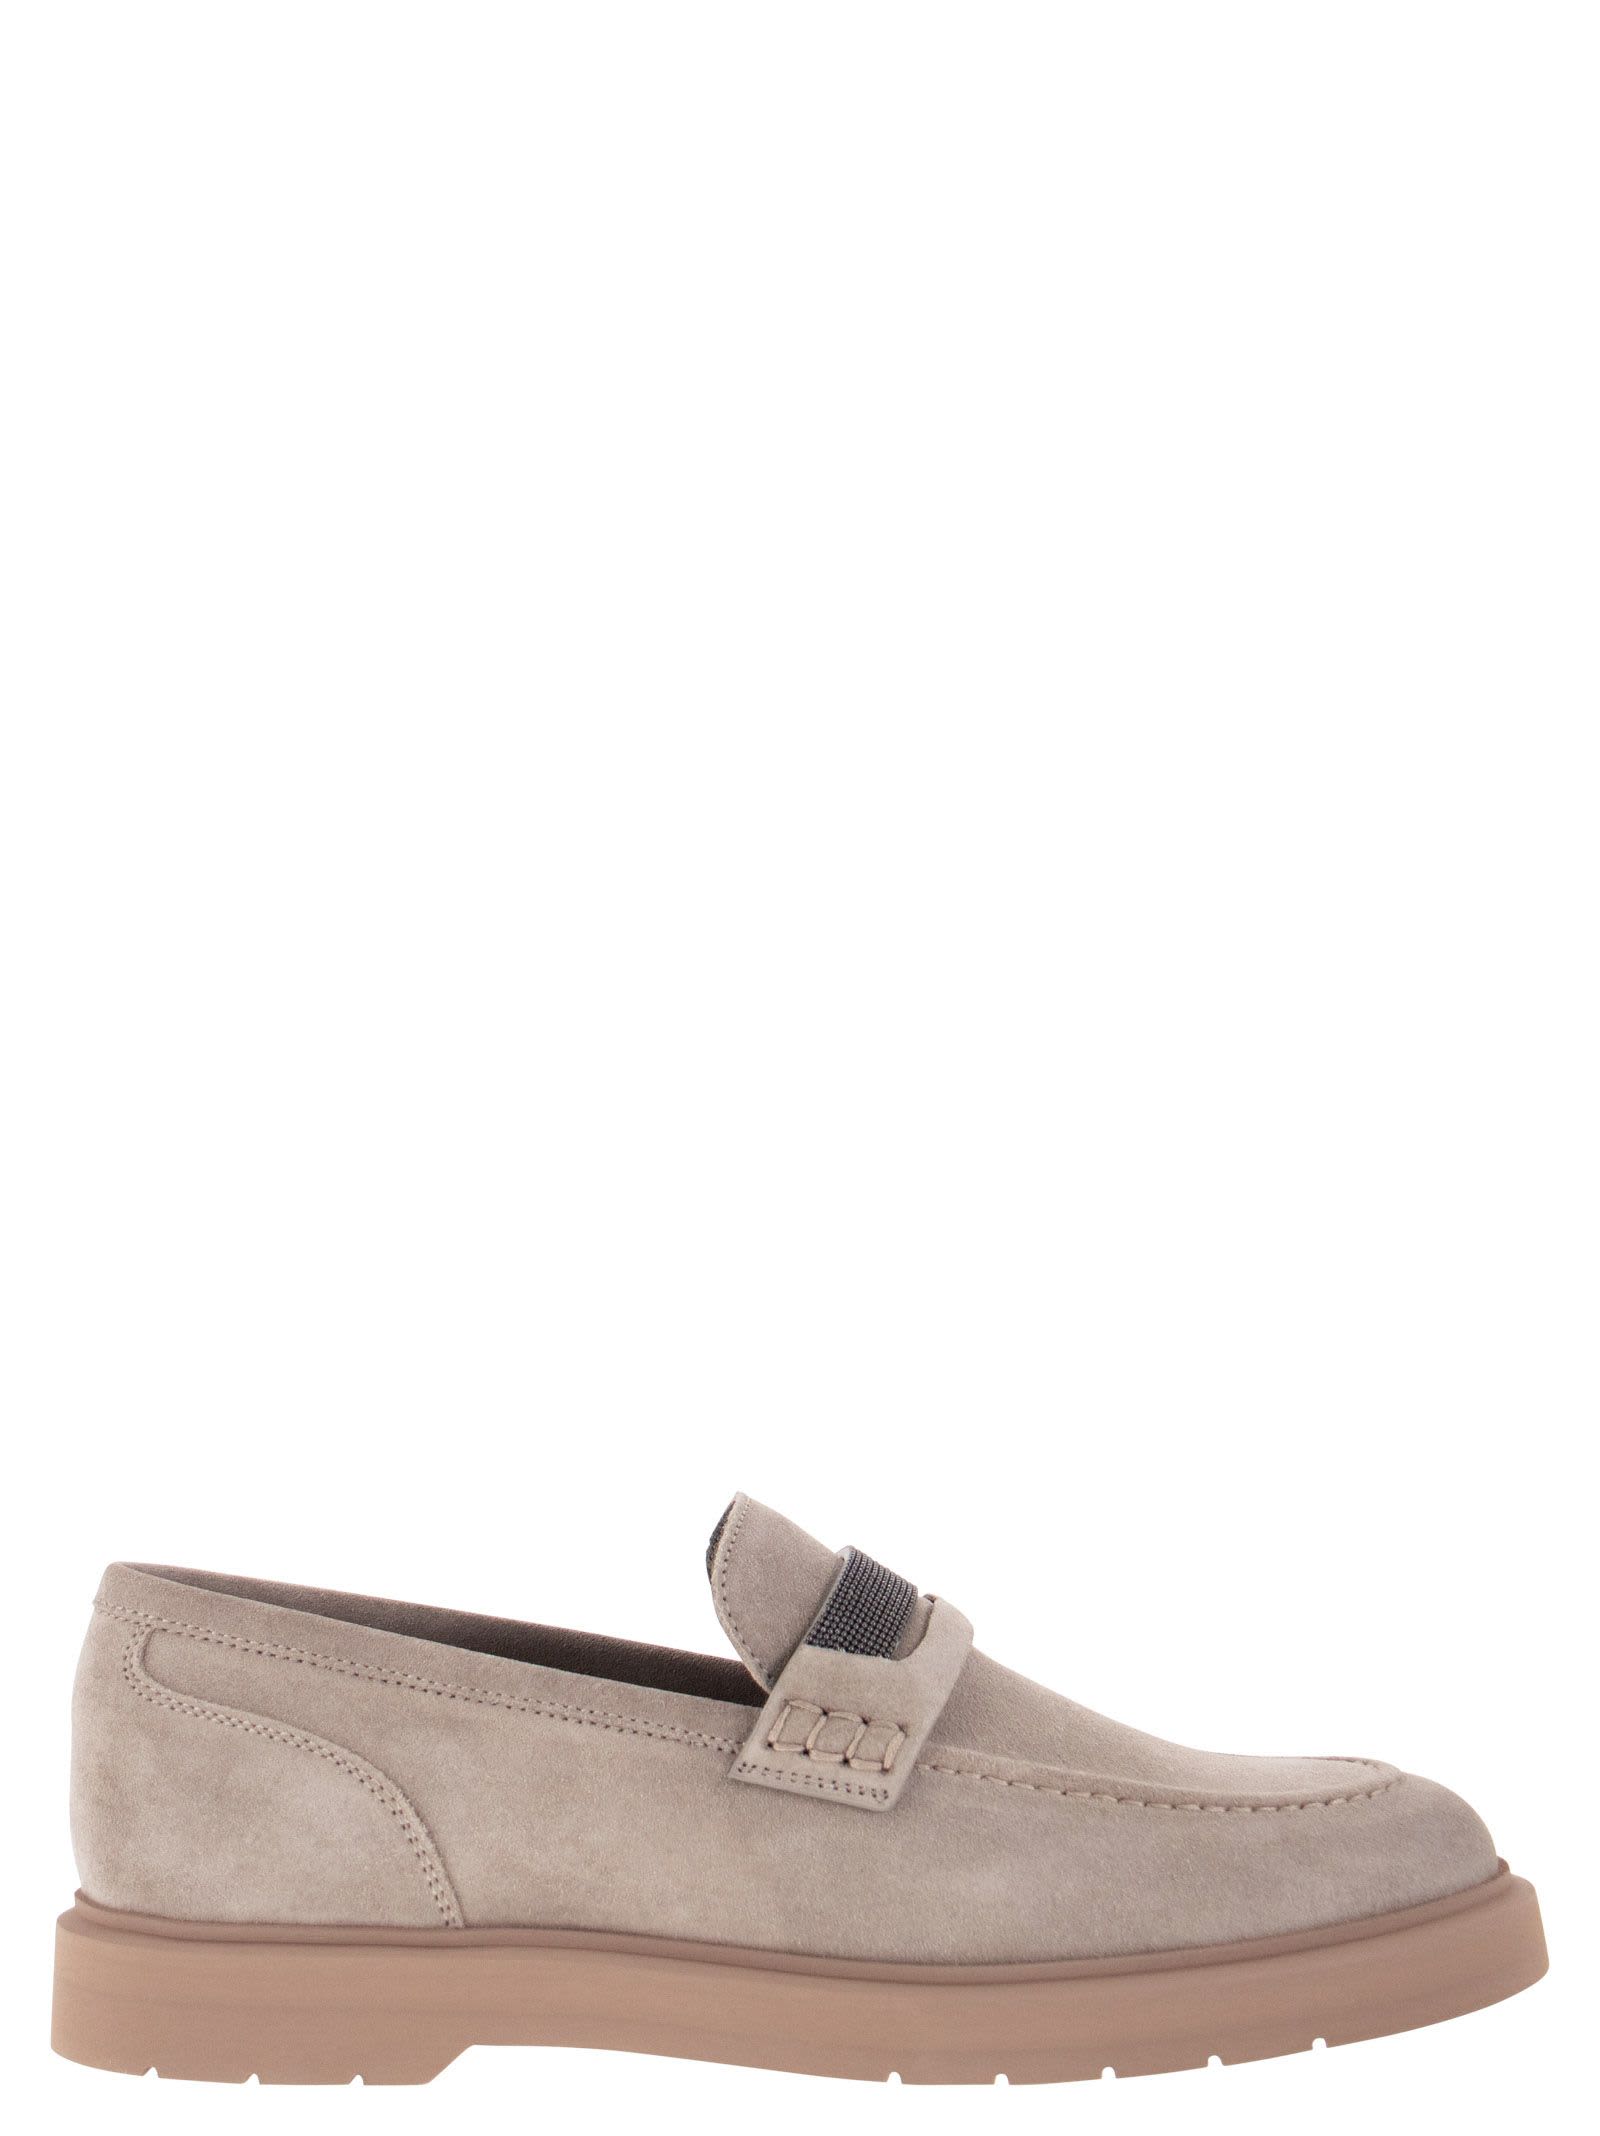 BRUNELLO CUCINELLI SUEDE PENNY LOAFER WITH JEWELLERY